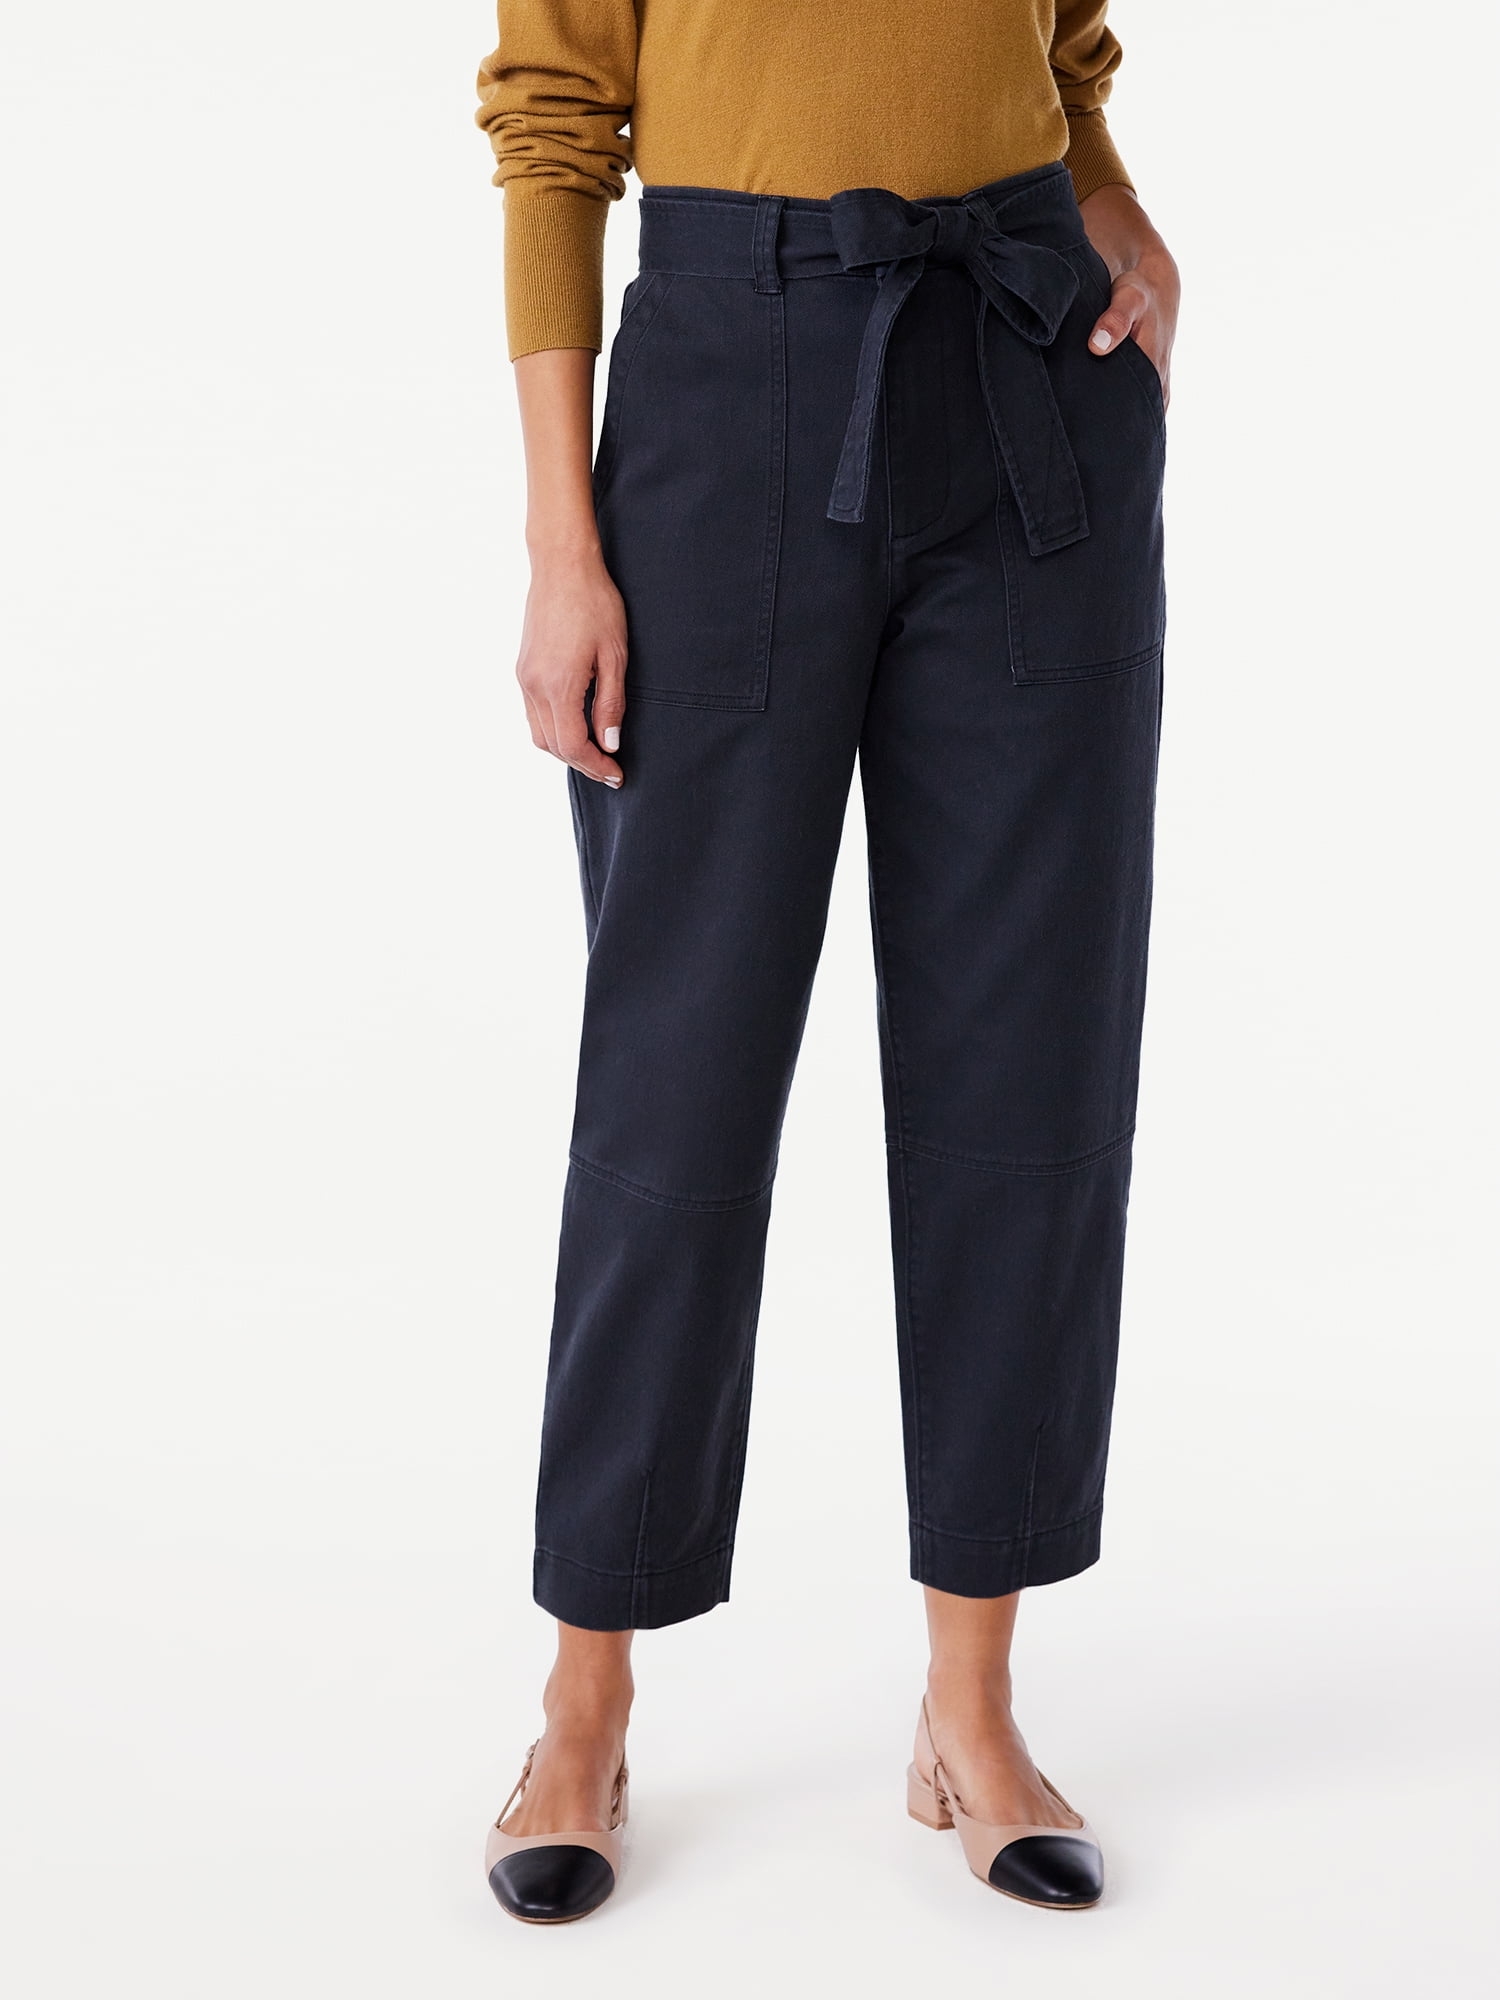 Free Assembly Women's High Rise Belted Barrel Pants, 26” Inseam for ...